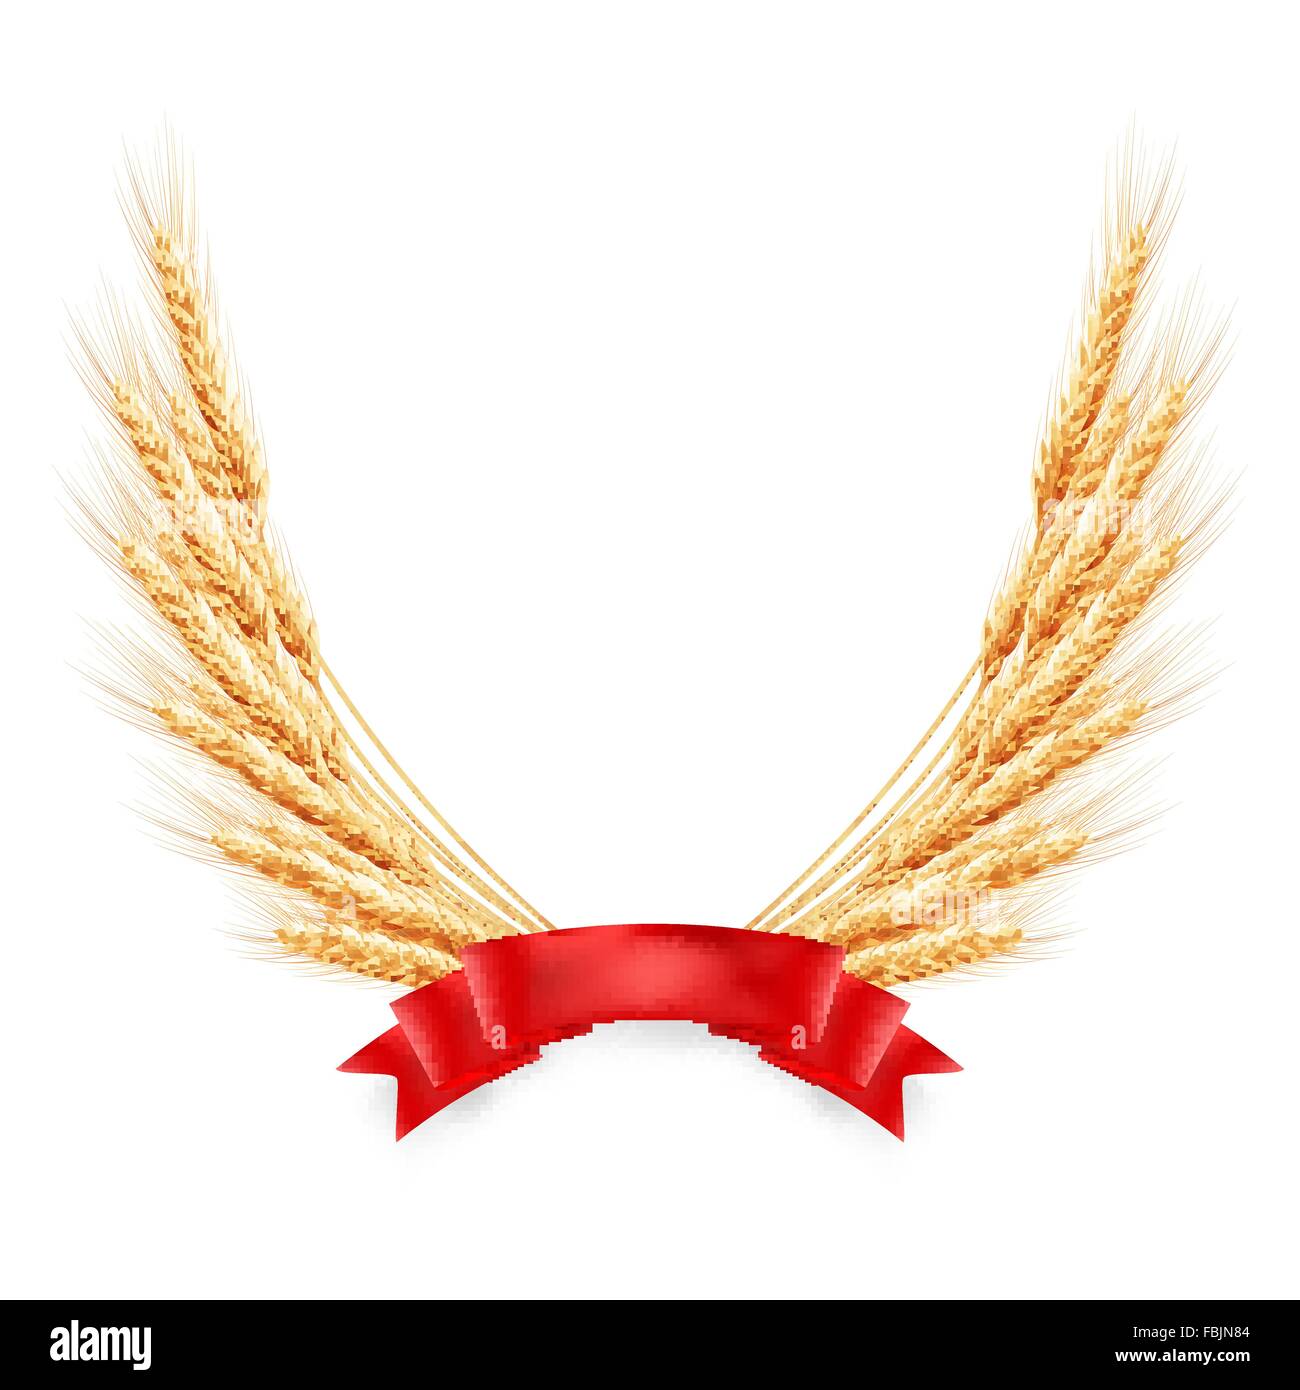 Ripe yellow wheat ears with red ribbon. EPS 10 Stock Vector